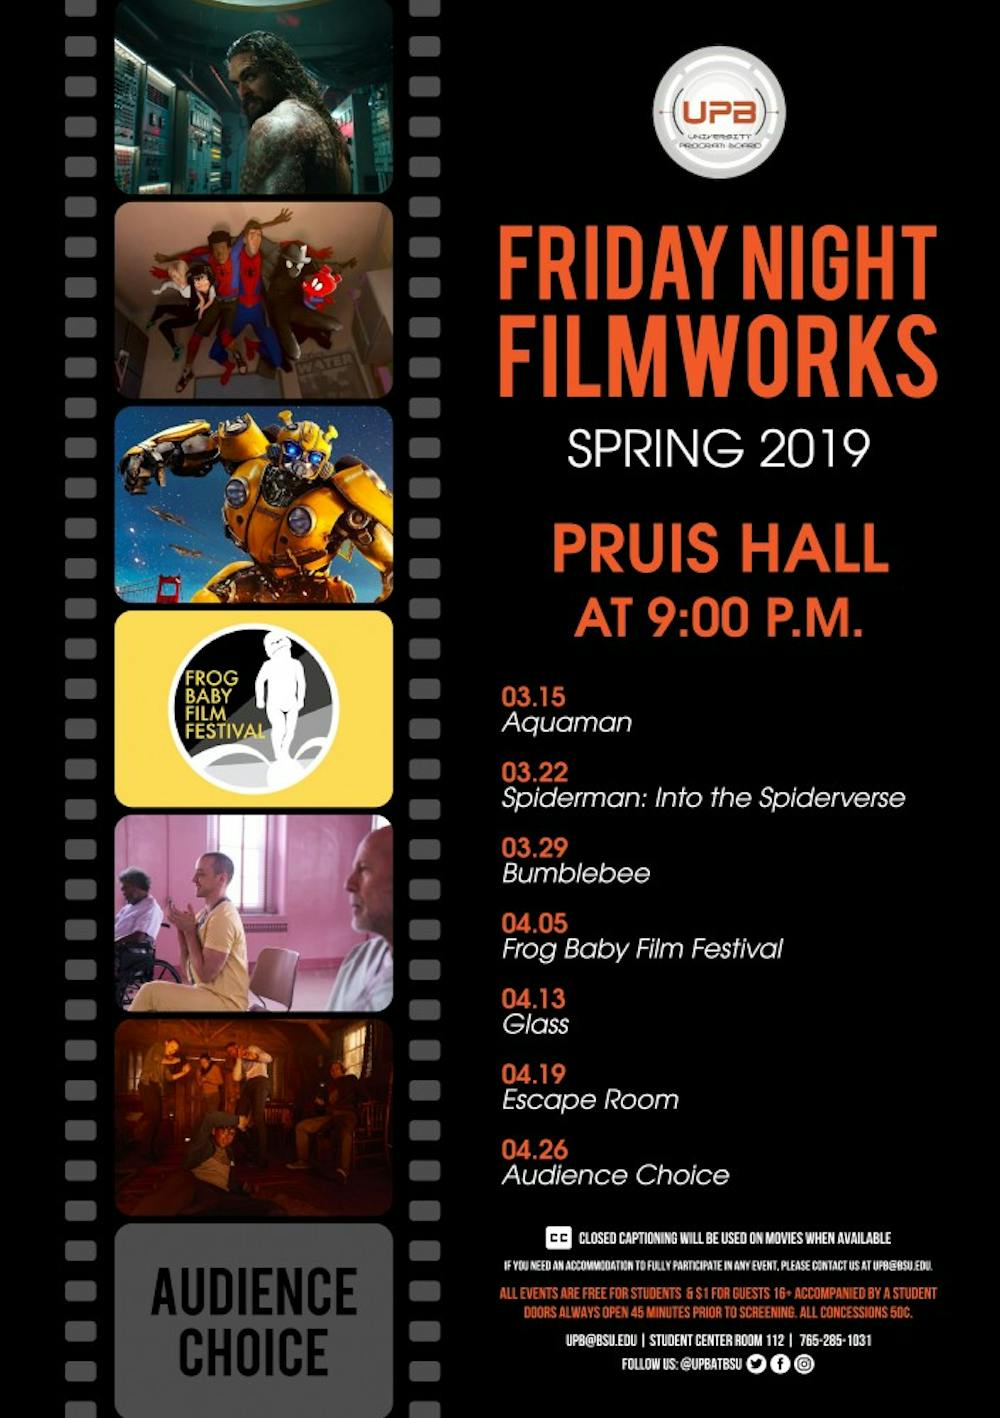 The University Program Board has released the rest of its schedule for the Spring 2019 semester. The films will be shown at 9 p.m. Friday nights in Pruis Hall. 